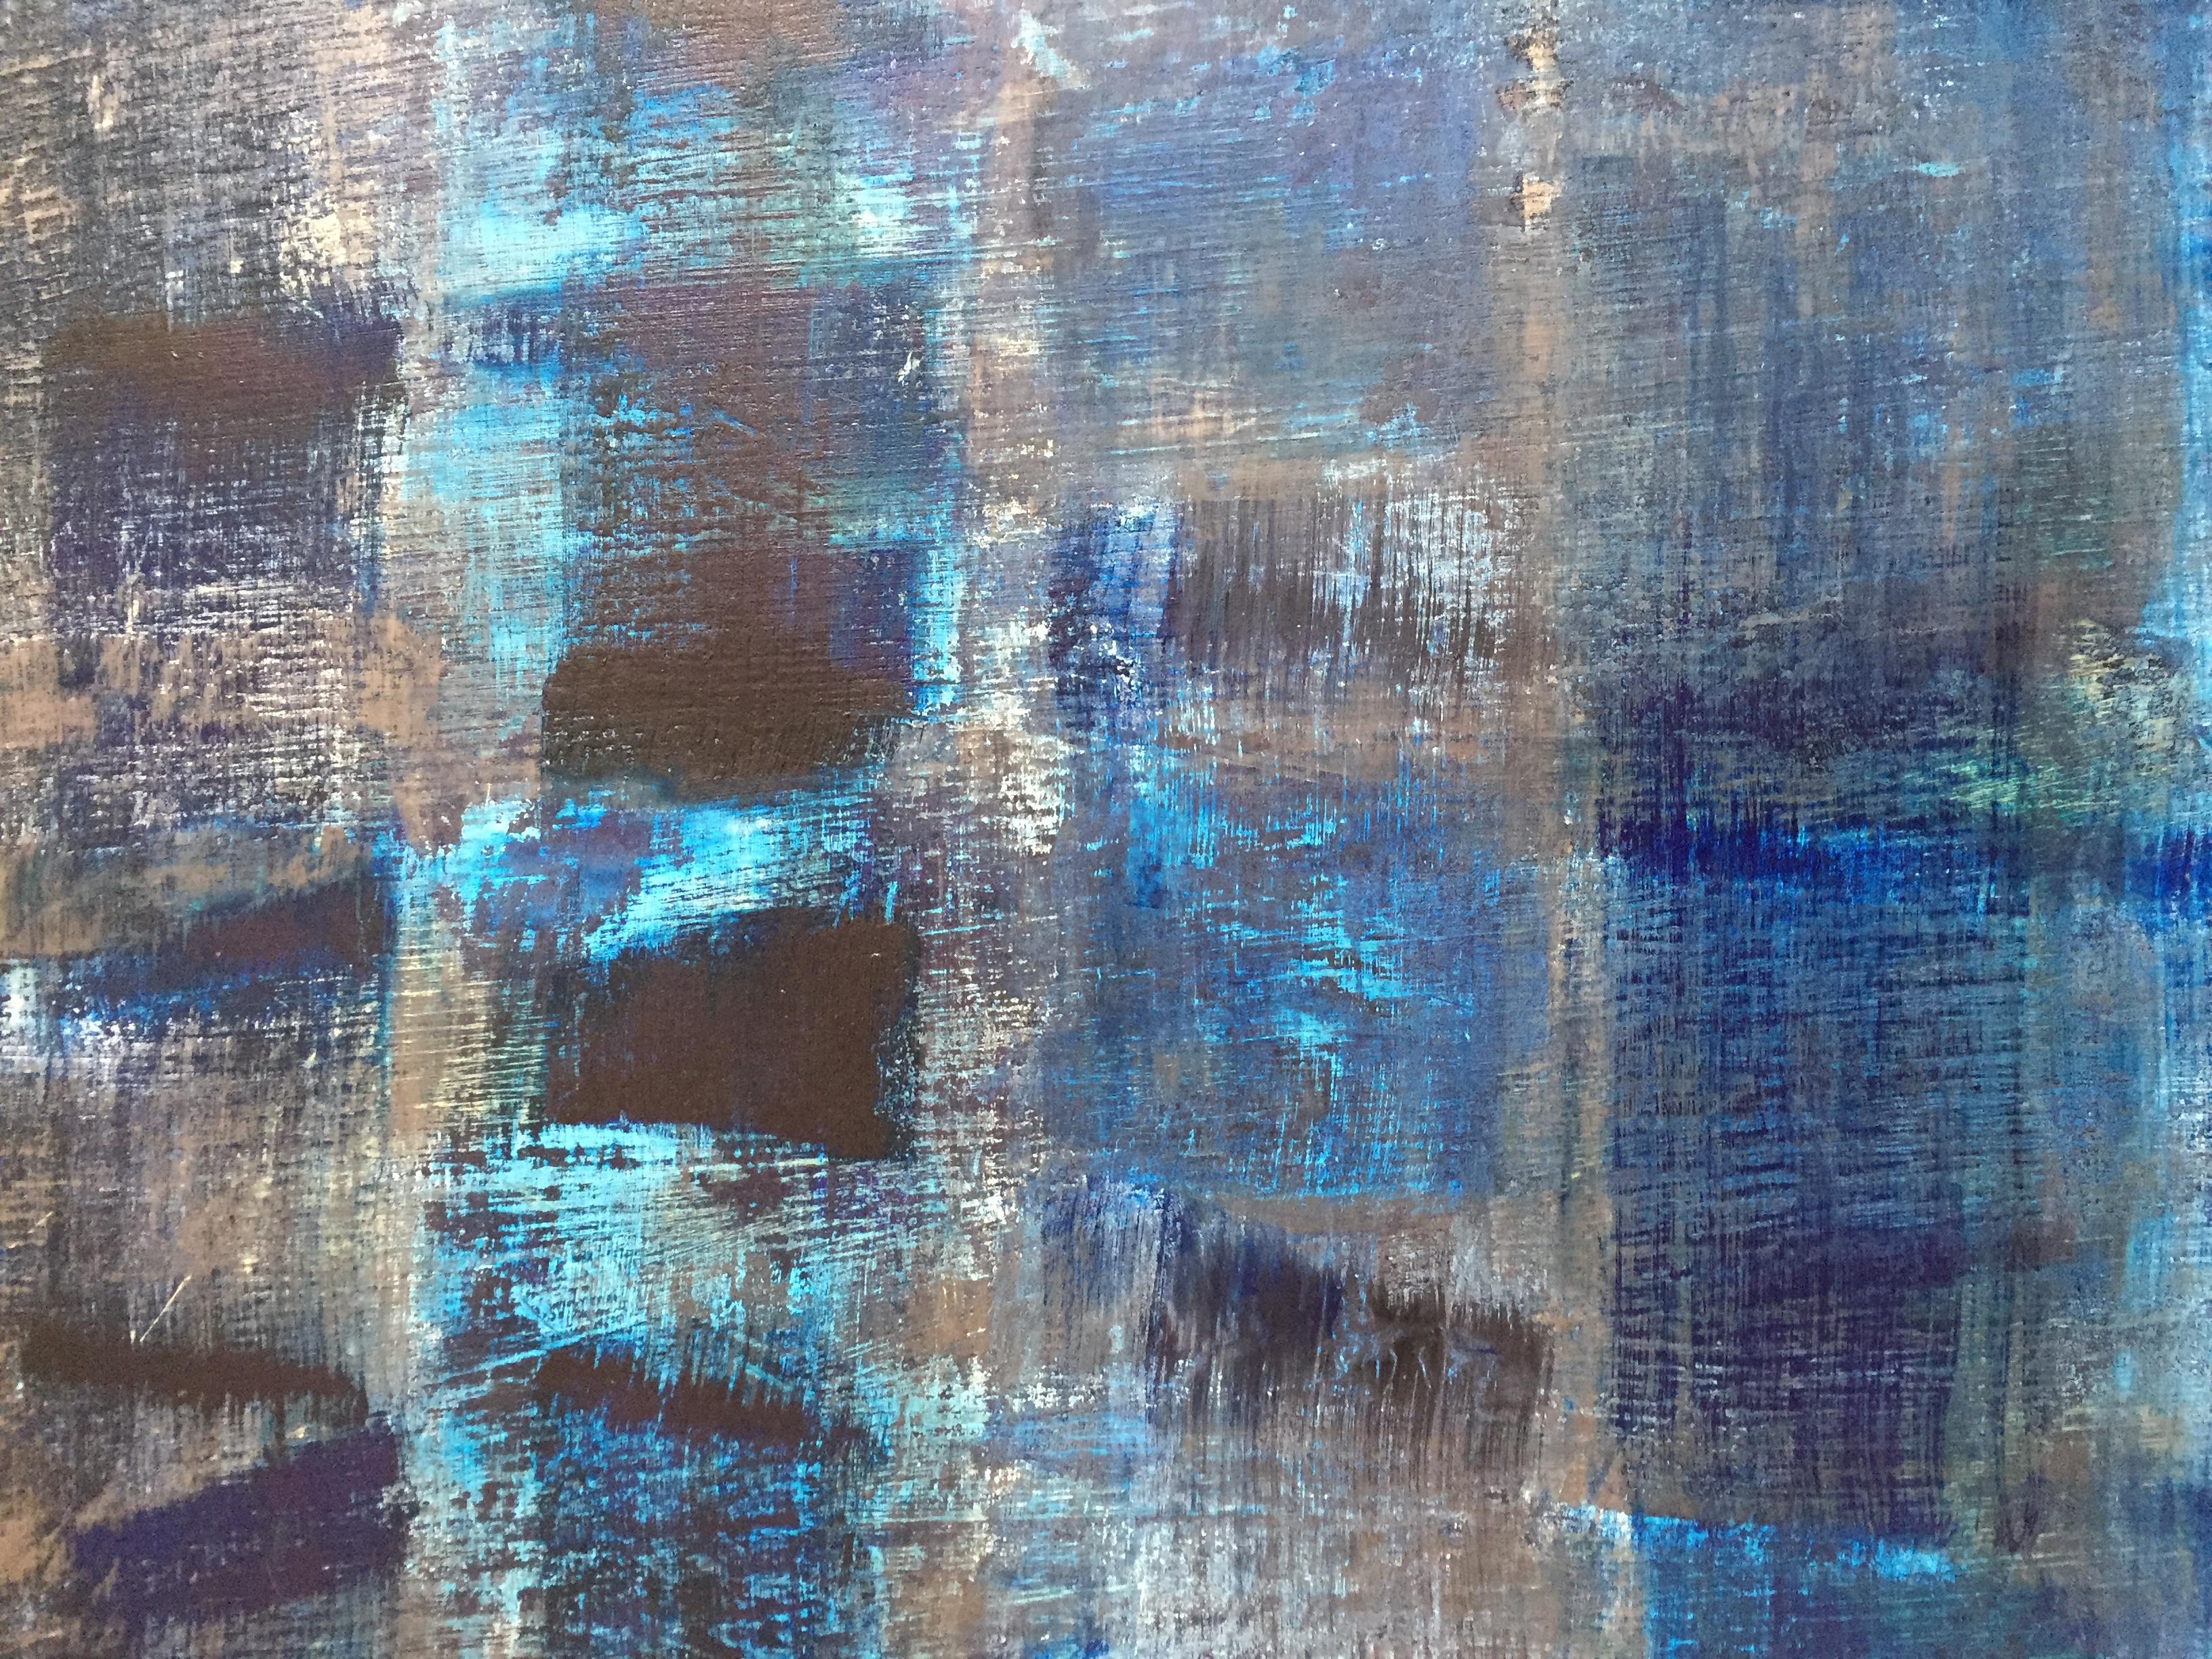 Blue on Blue (Abstract painting)

Oil on wood panel - Unframed.

She layers paint in gestural, horizontal swaths from left to right, stacking the horizontal bands from top to bottom of the surface. An interplay of complementary colors creates a